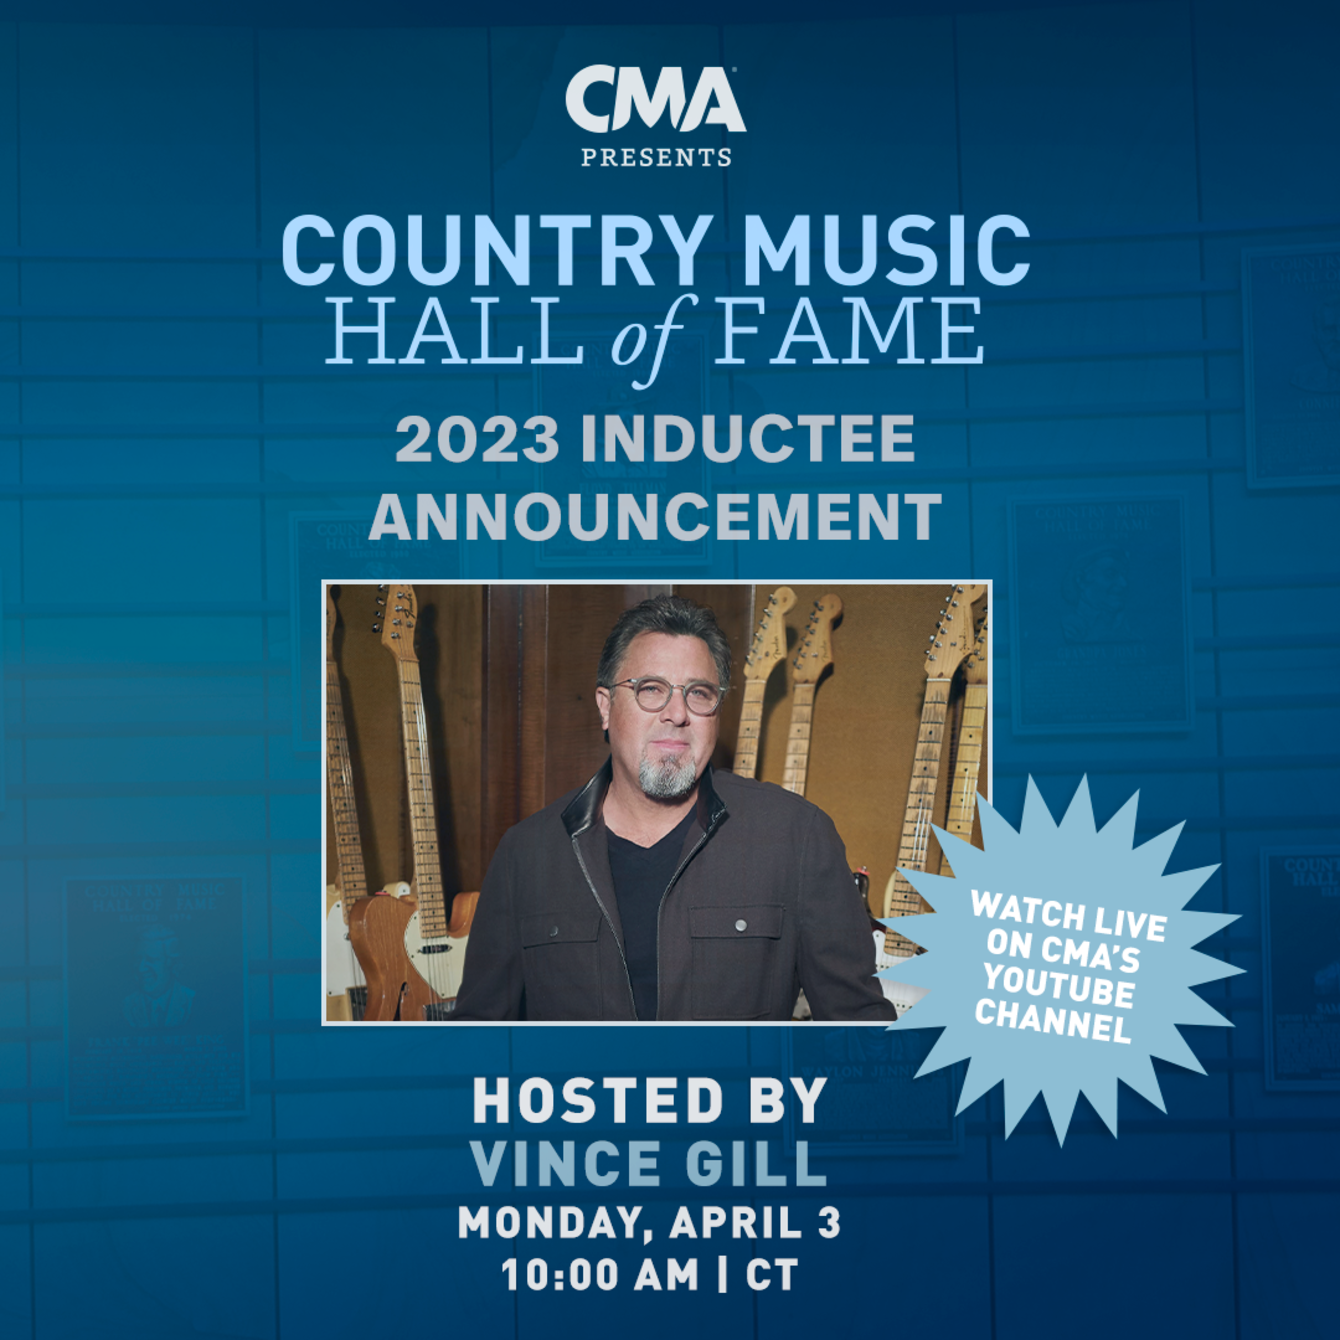 Country Music Hall of Fame 2023 Induction Announcement - Nashville, TN